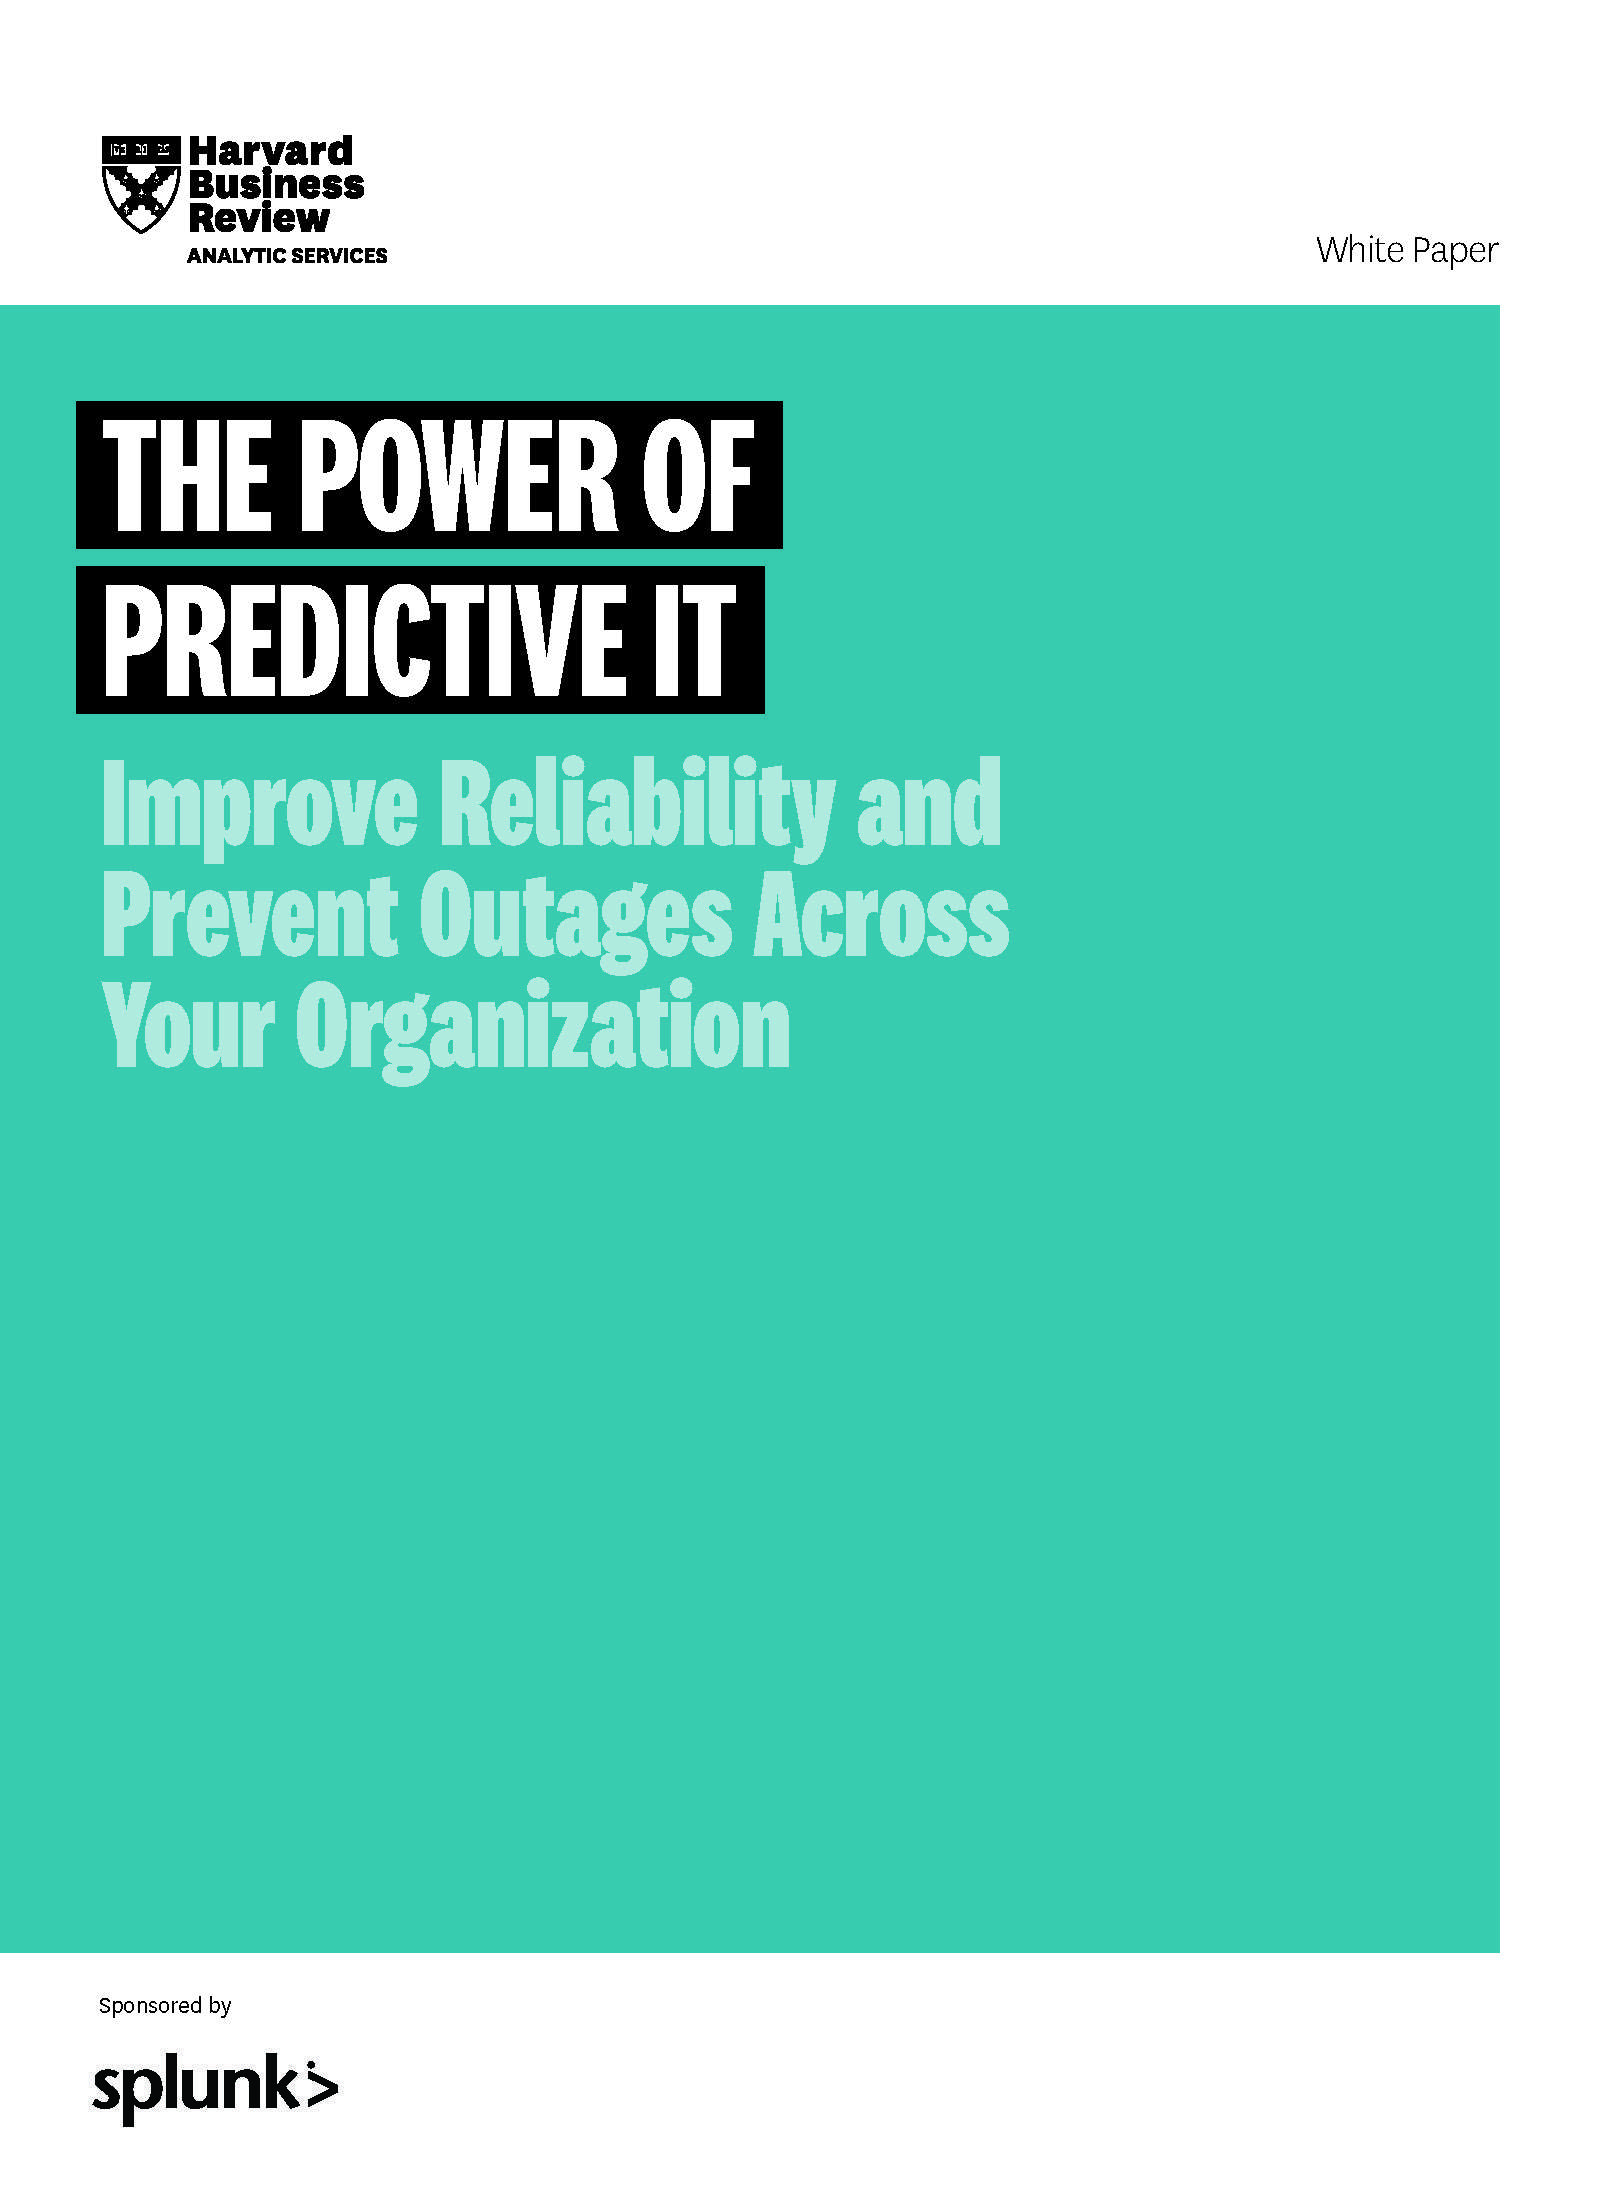 the power of predictive it 1 - The Power of Predictive IT